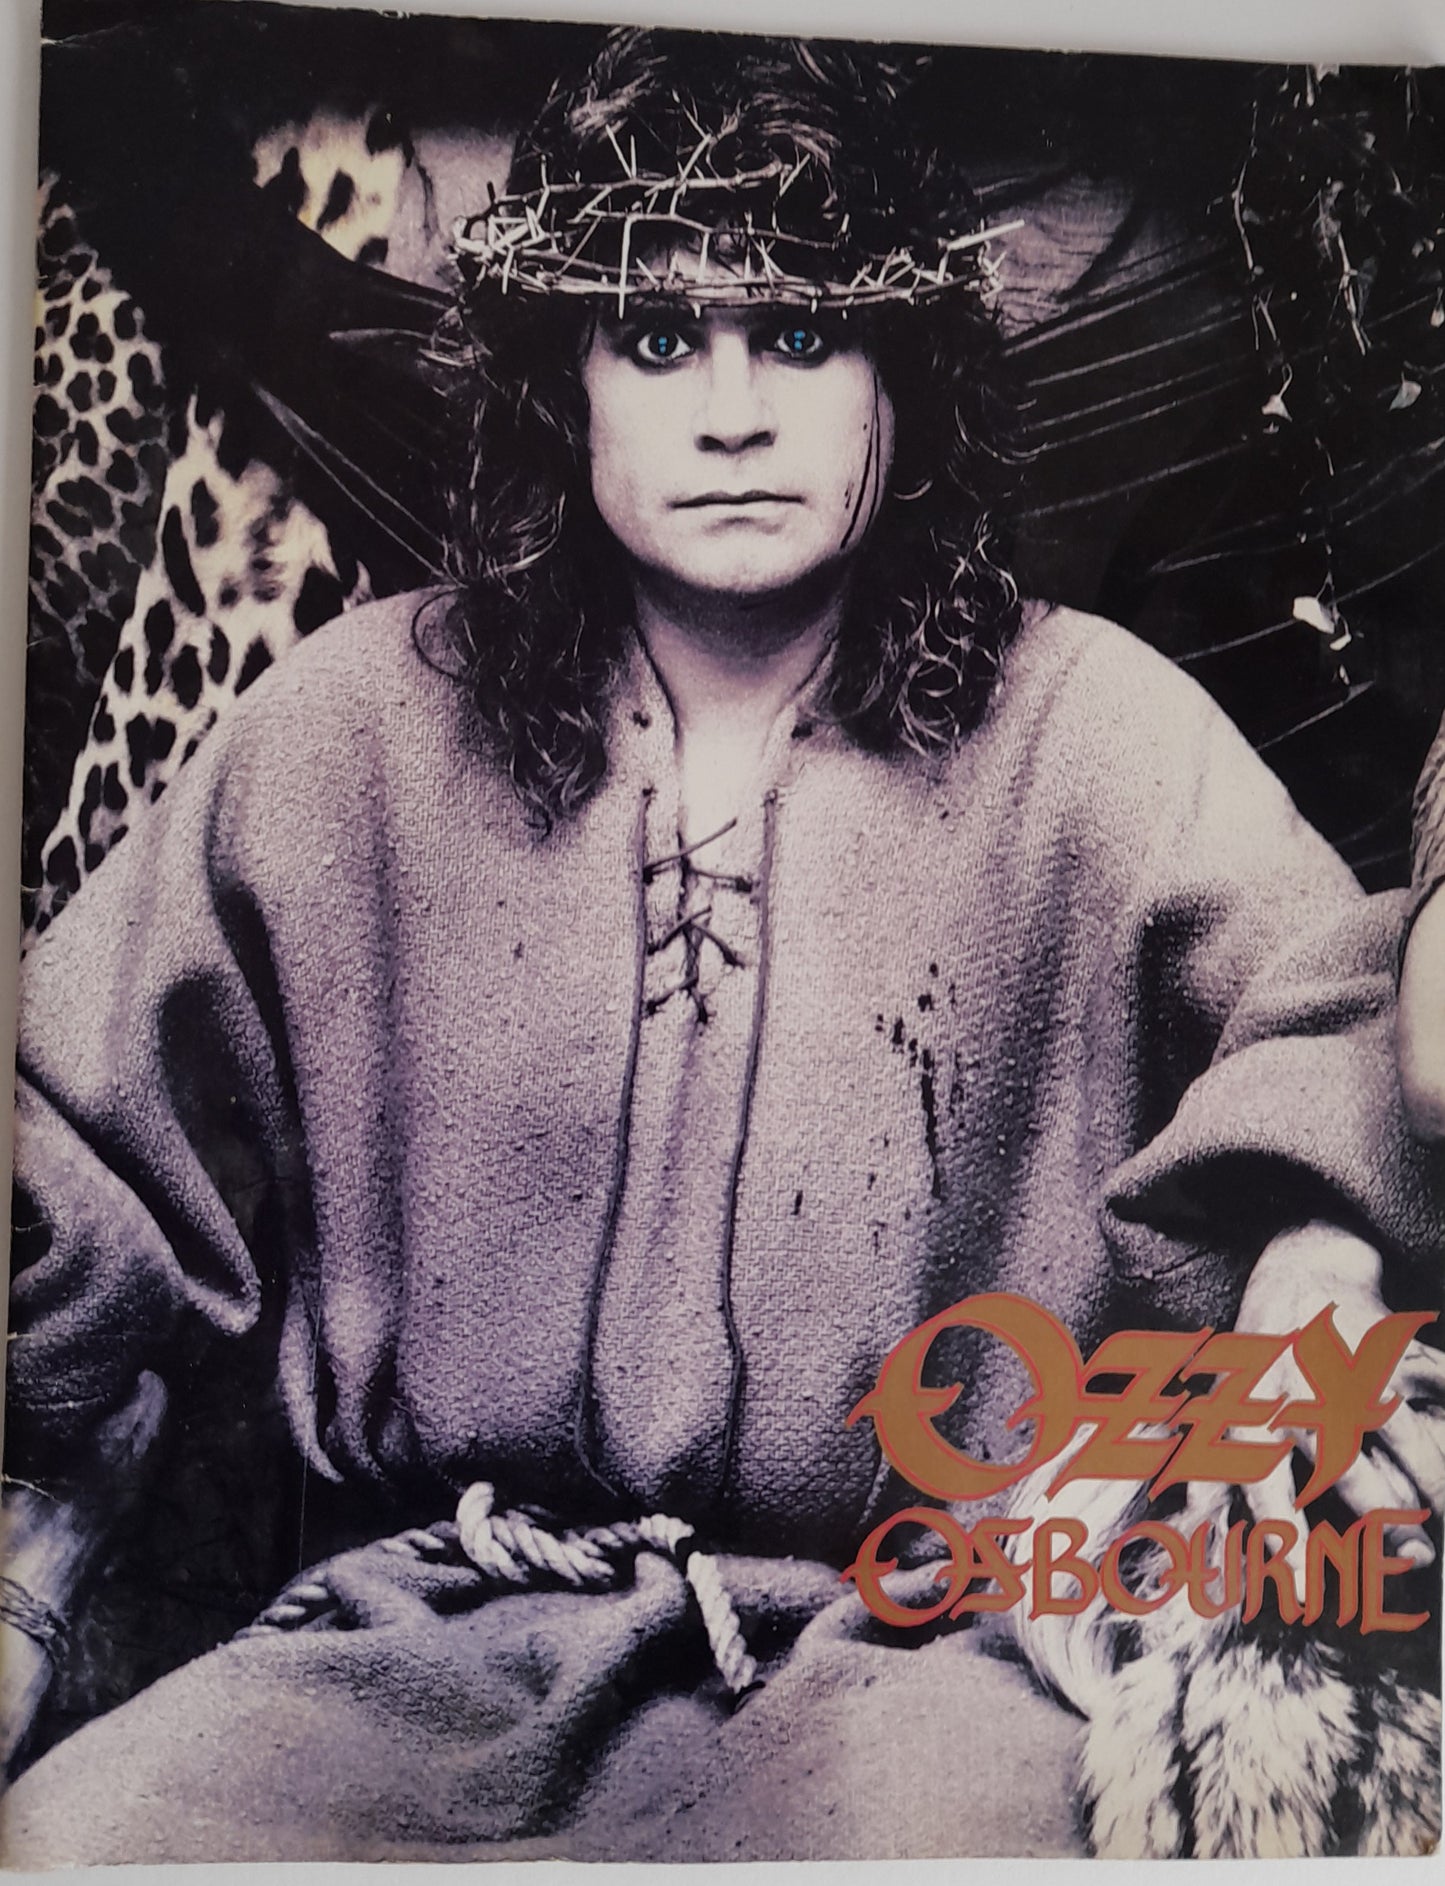 Ozzy Osbourne No Rest for the Wicked Tour Programme 1989